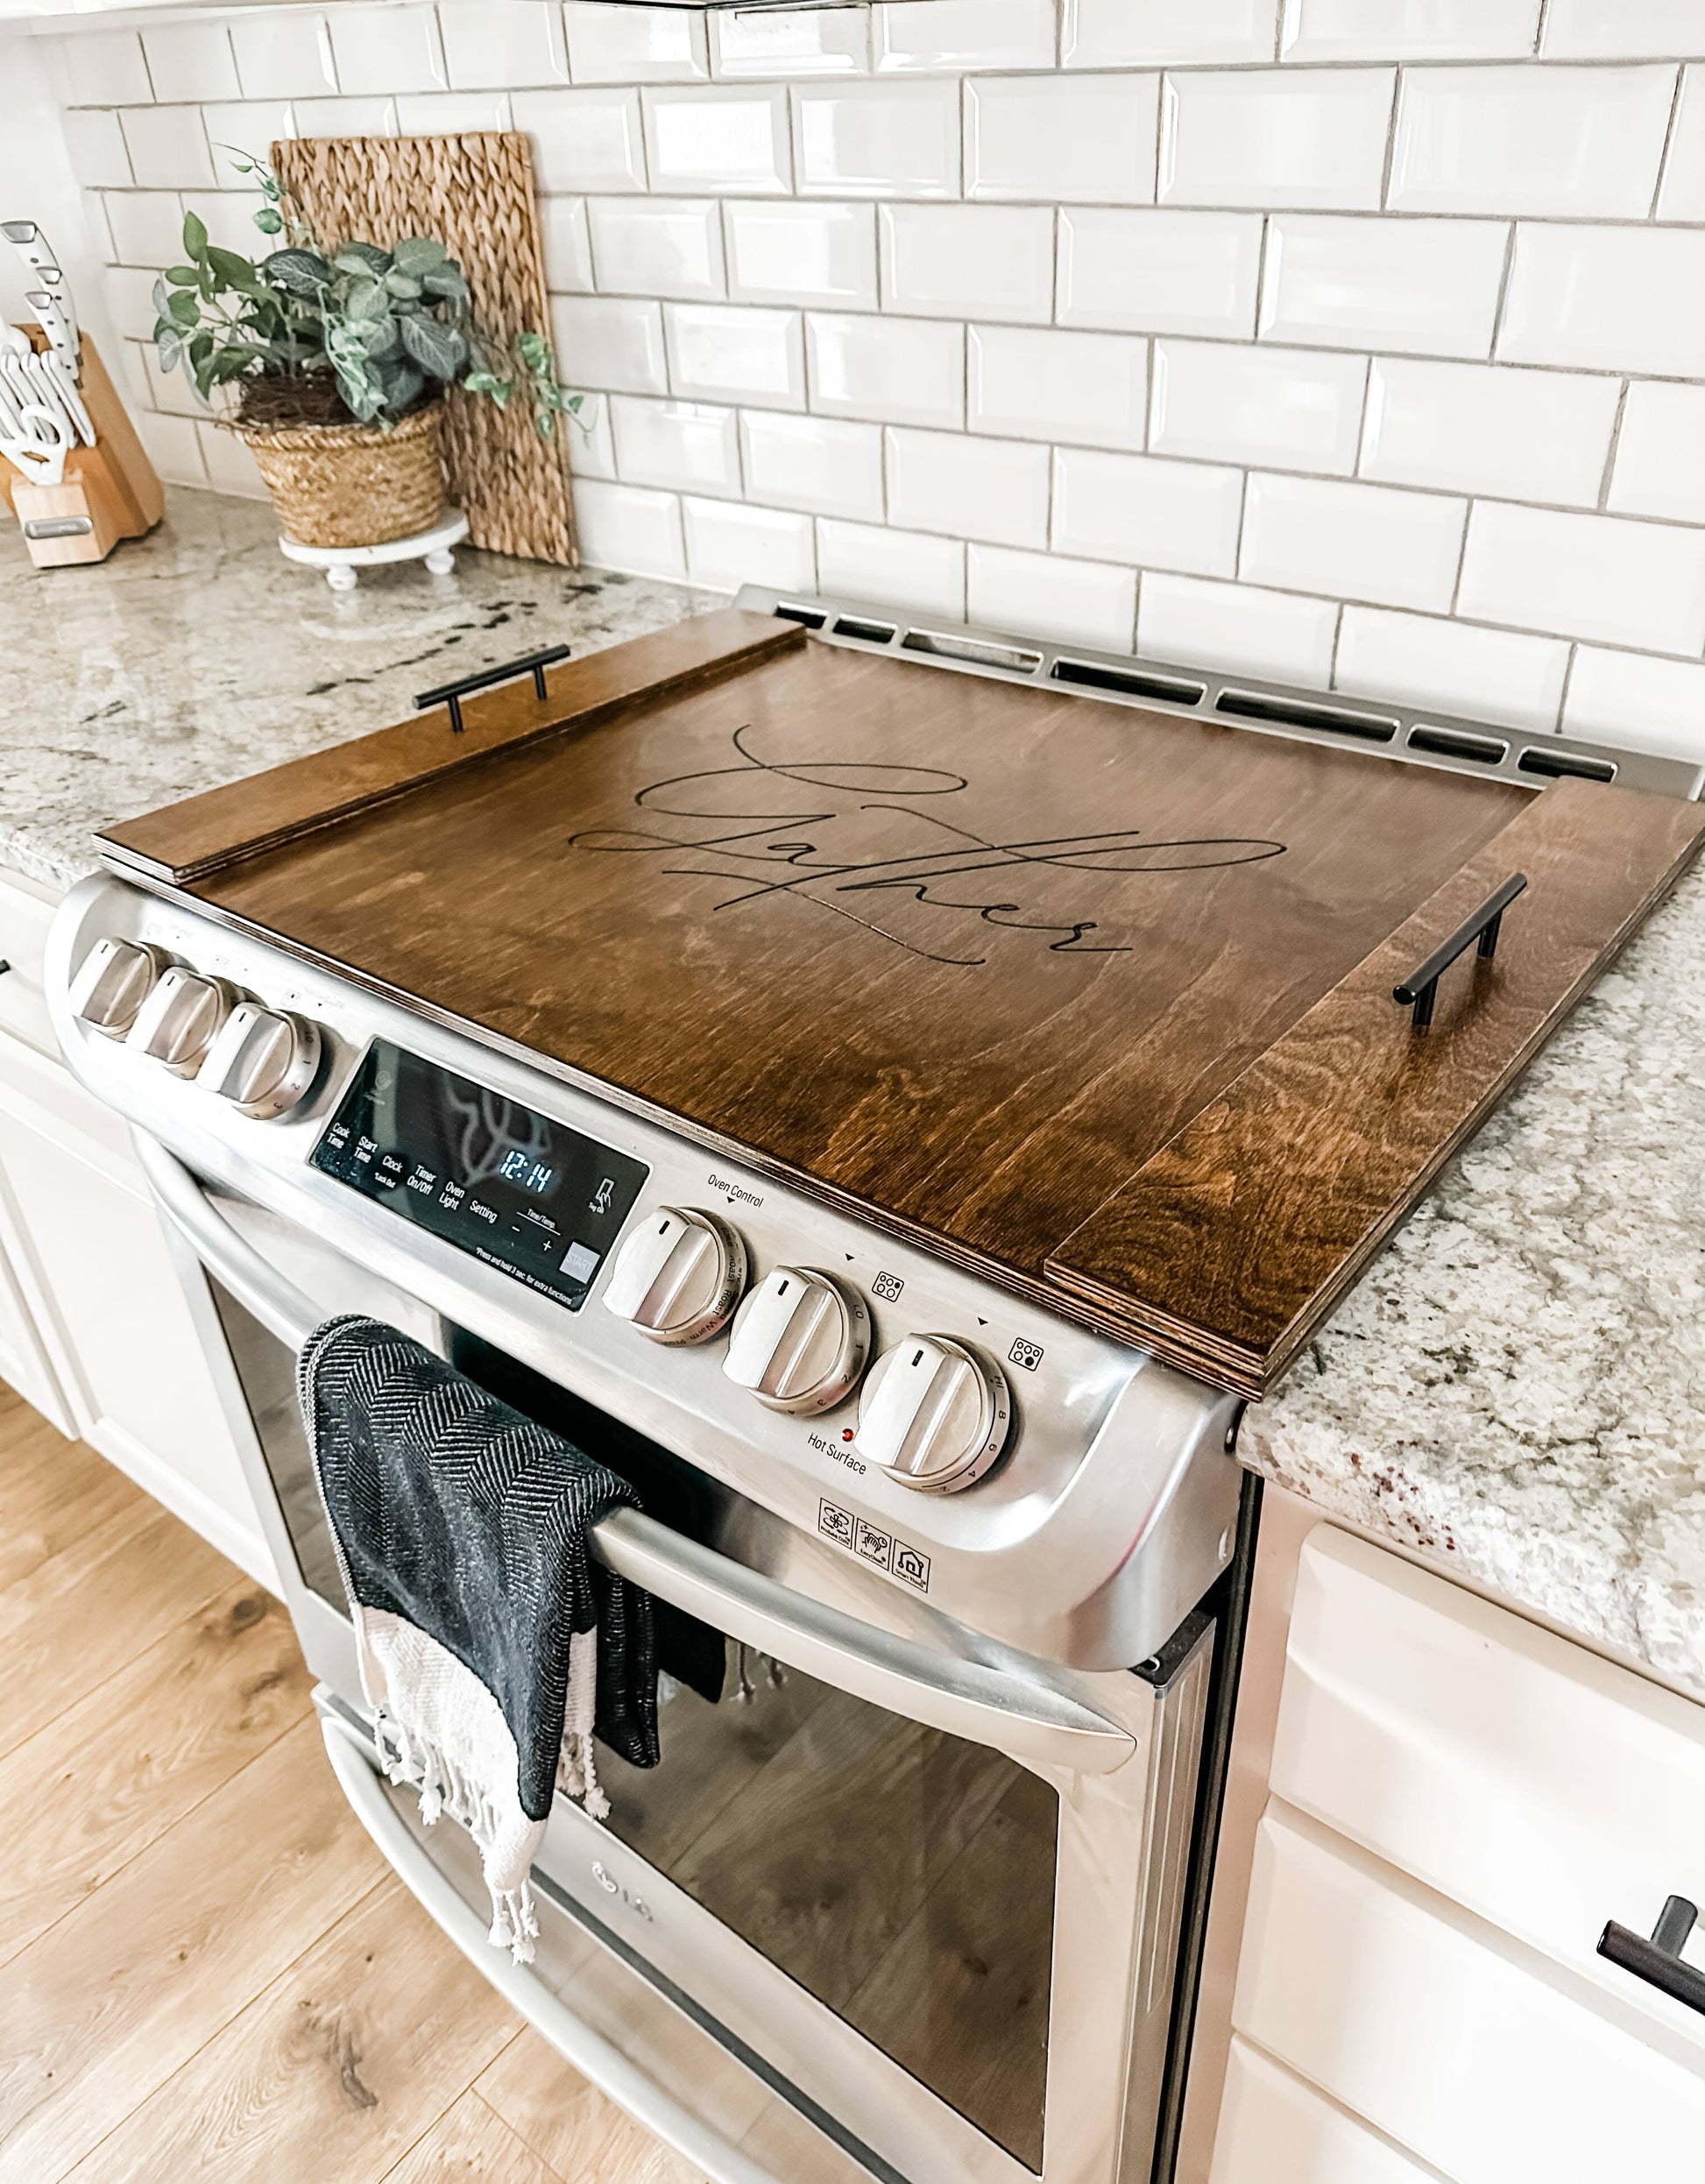  Noodle Board Stove Cover for Gas Stove, Wood Stove Top Covers  for Electric Stove, 30x22 Inch Wooden Stove Top Cover Stove Cover Board  with Handles, Farm House Style Electric Stove Top